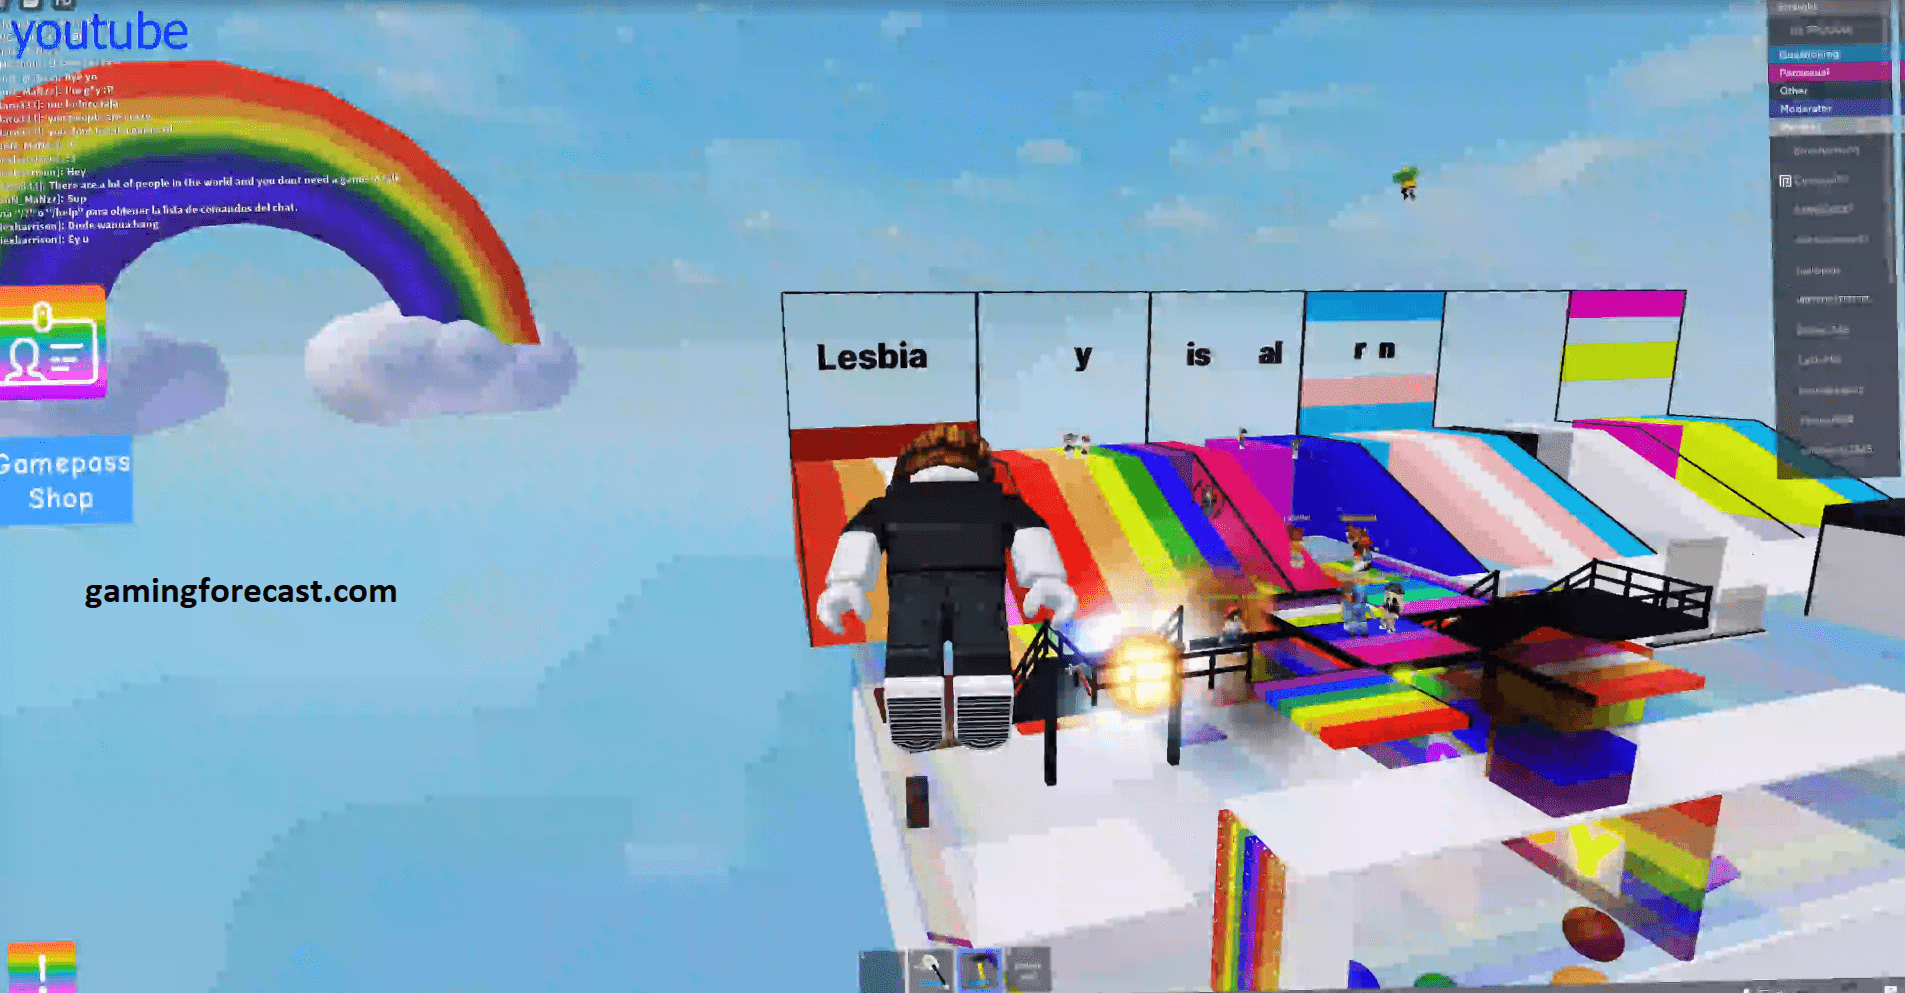 Roblox Hack Download Pc Destroy Lobby Fly Aimbot Scripts 2021 Gaming Forecast Download Free Online Game Hacks - roblox aimbot script all games